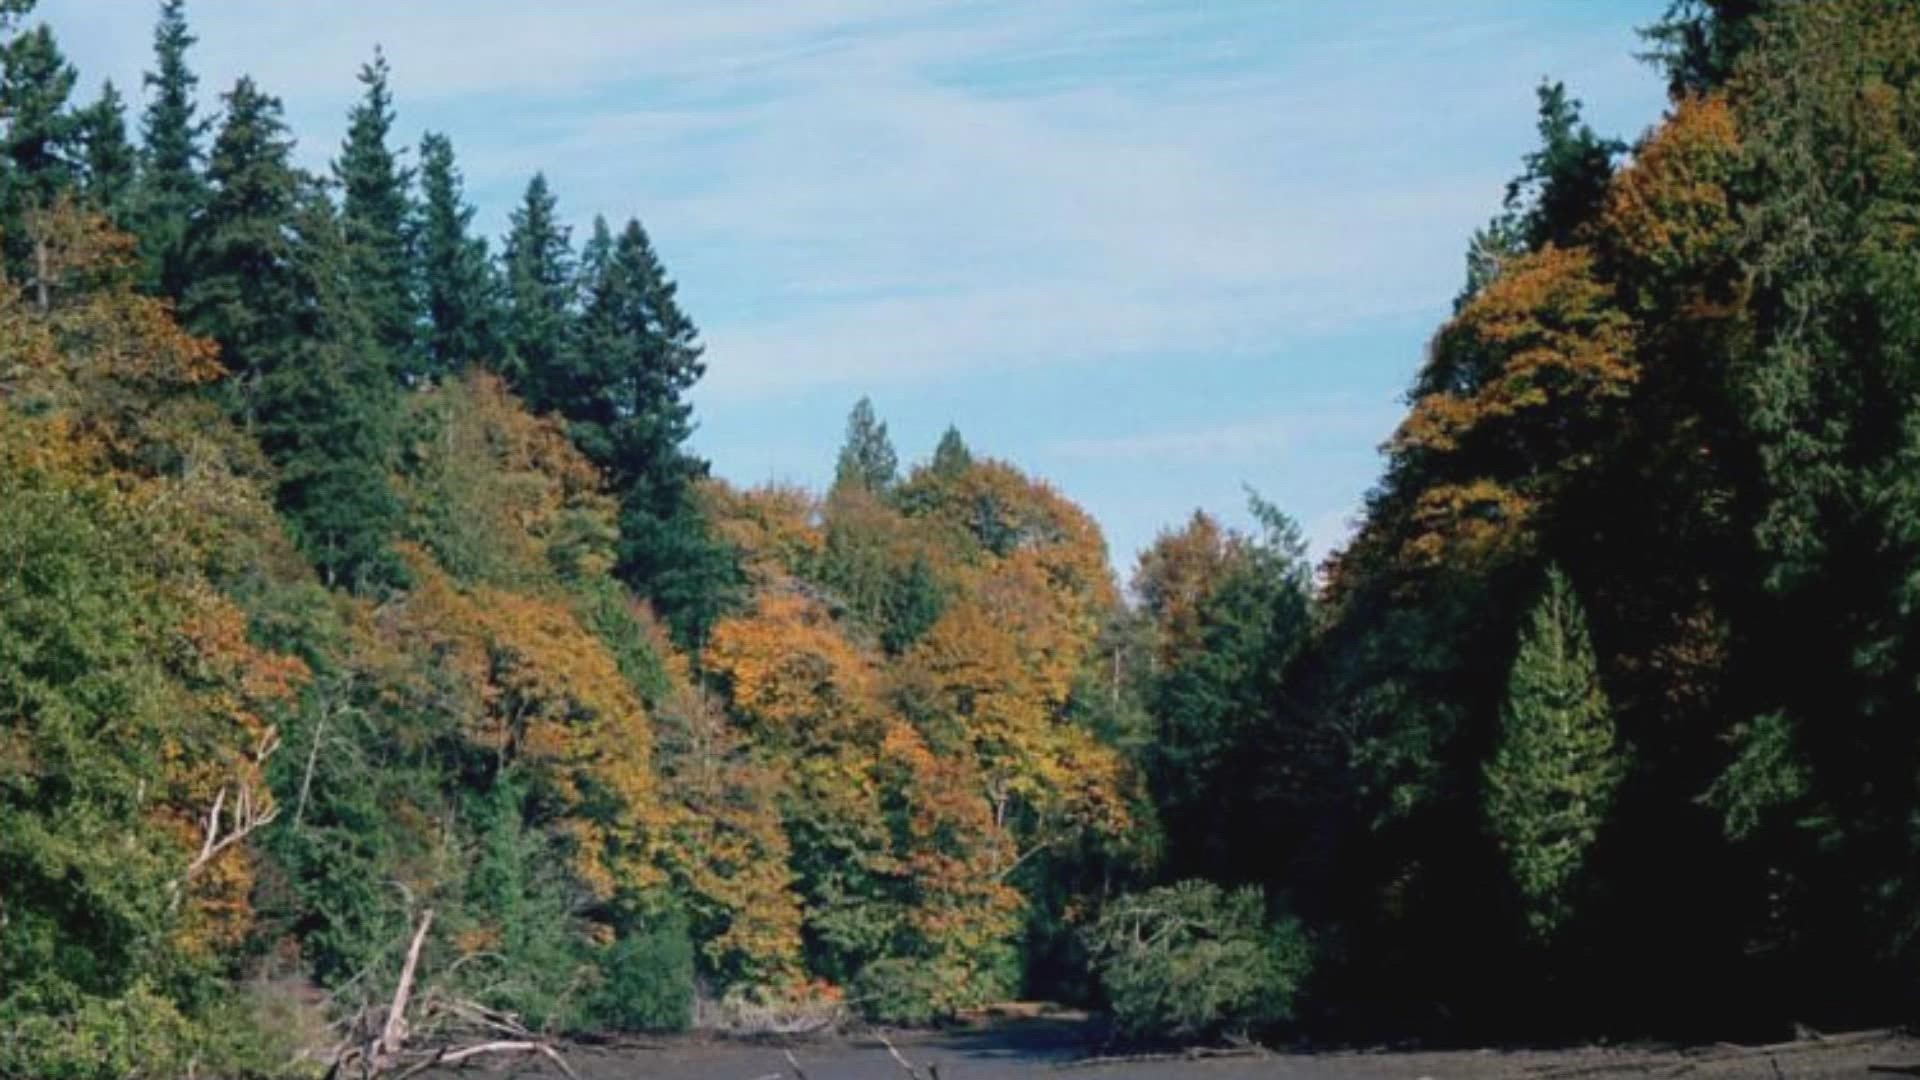 The Steh-Chass people lived in Olympia for thousands of years, and Squaxin Island Tribal history indicates the Tribe valued the area now known as Priest Point Park.